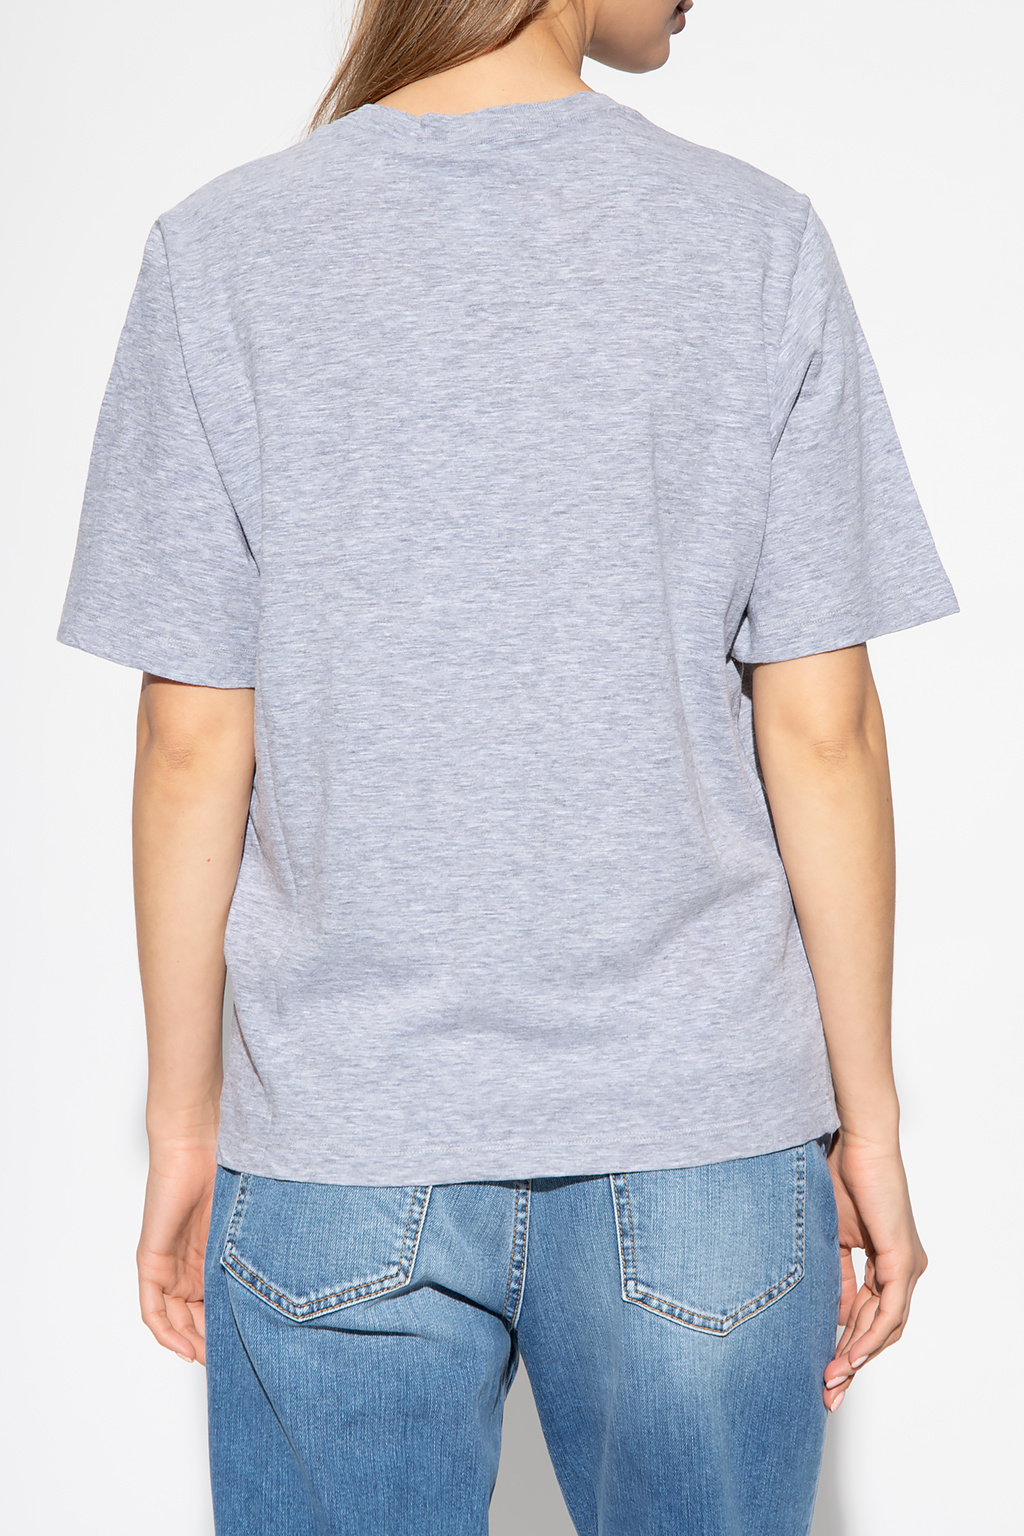 Dsquared2 Calvin Klein Iconic Short Sleeve T-Shirt